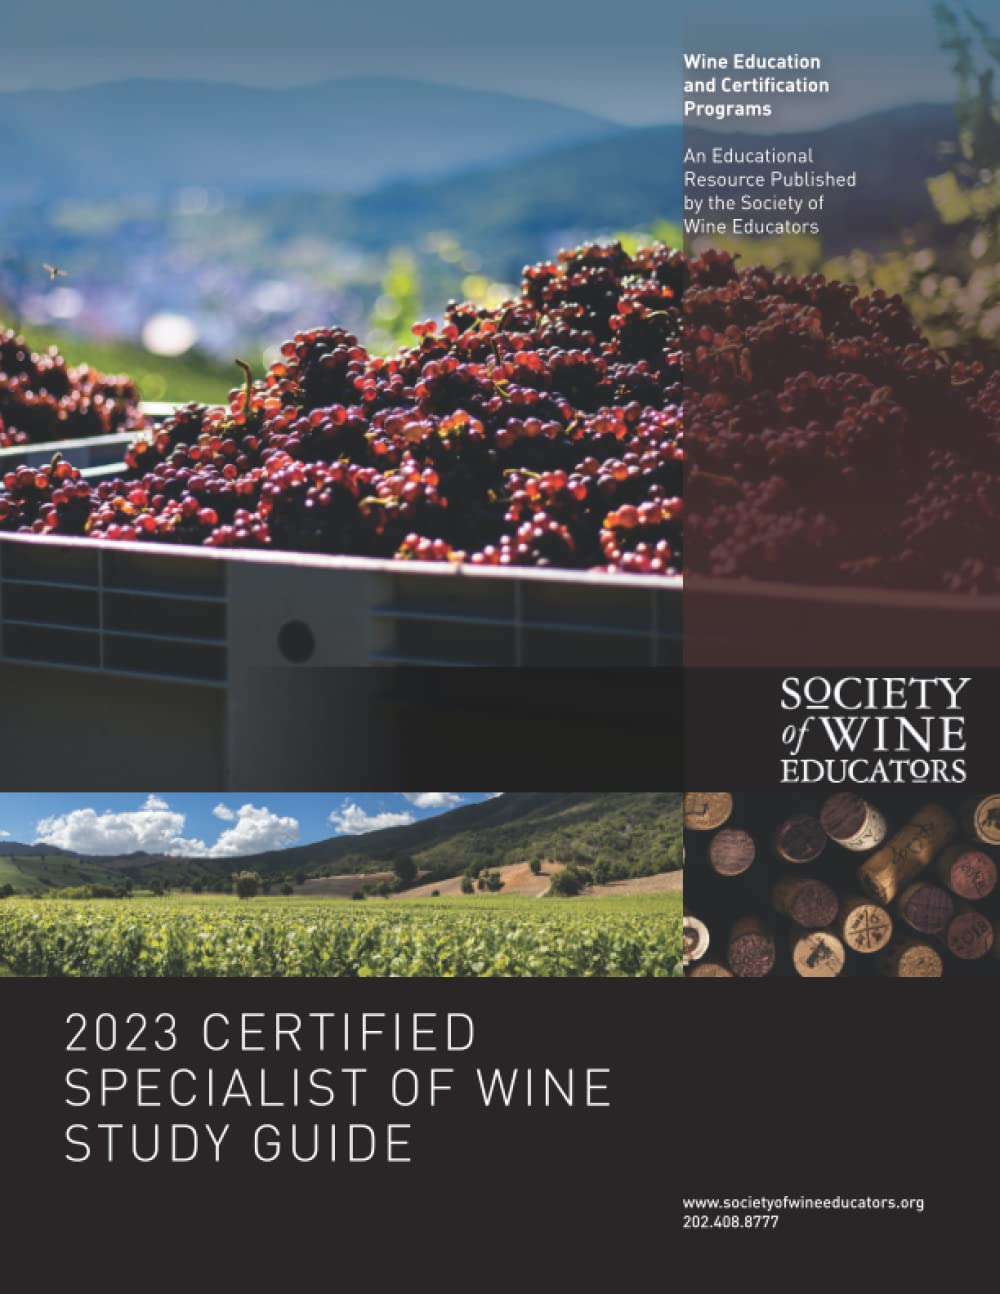 Jane Nickles: 2023 Certified Specialist of Wine Study Guide (Paperback, Society of Wine Educators)